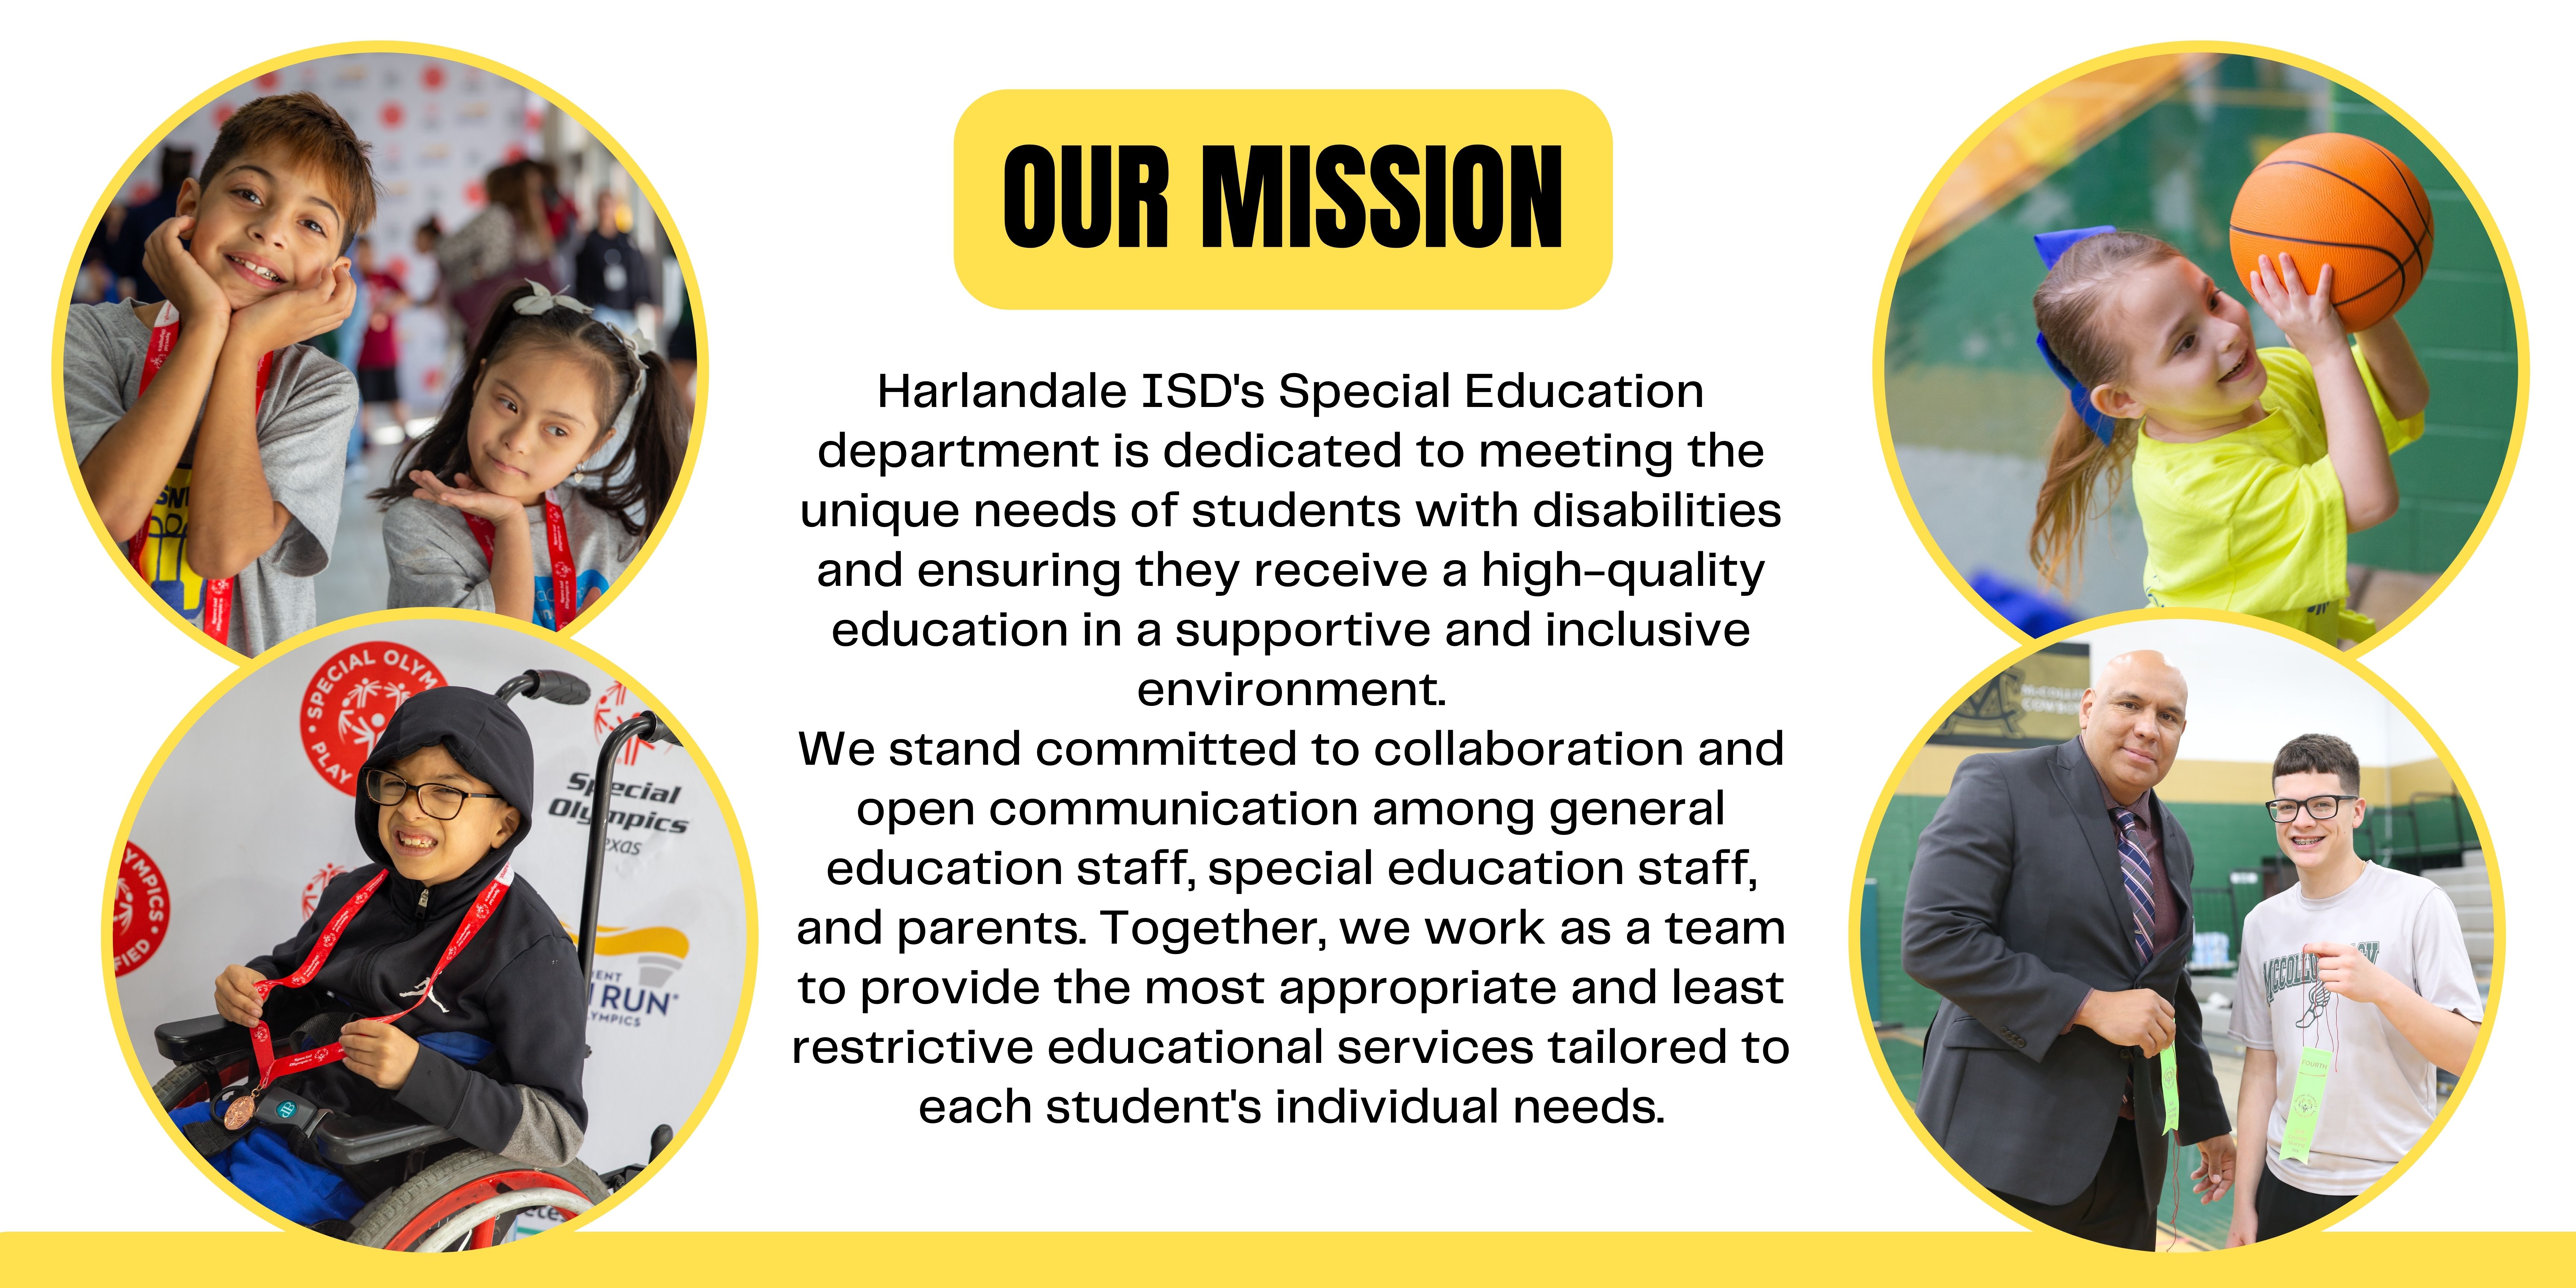 Our Mission: Harlandale ISD's Special Education Department is dedicated to meeting the unique needs of students with disabilities and ensuring they receive a high-quality education in a supportive and inclusive environment. We stand committed to collaboration and open communication among general education staff, special education staff, and parents. Together, we work as a team to provide the most appropriate and least restrictive educational services tailored to each student's individual needs.